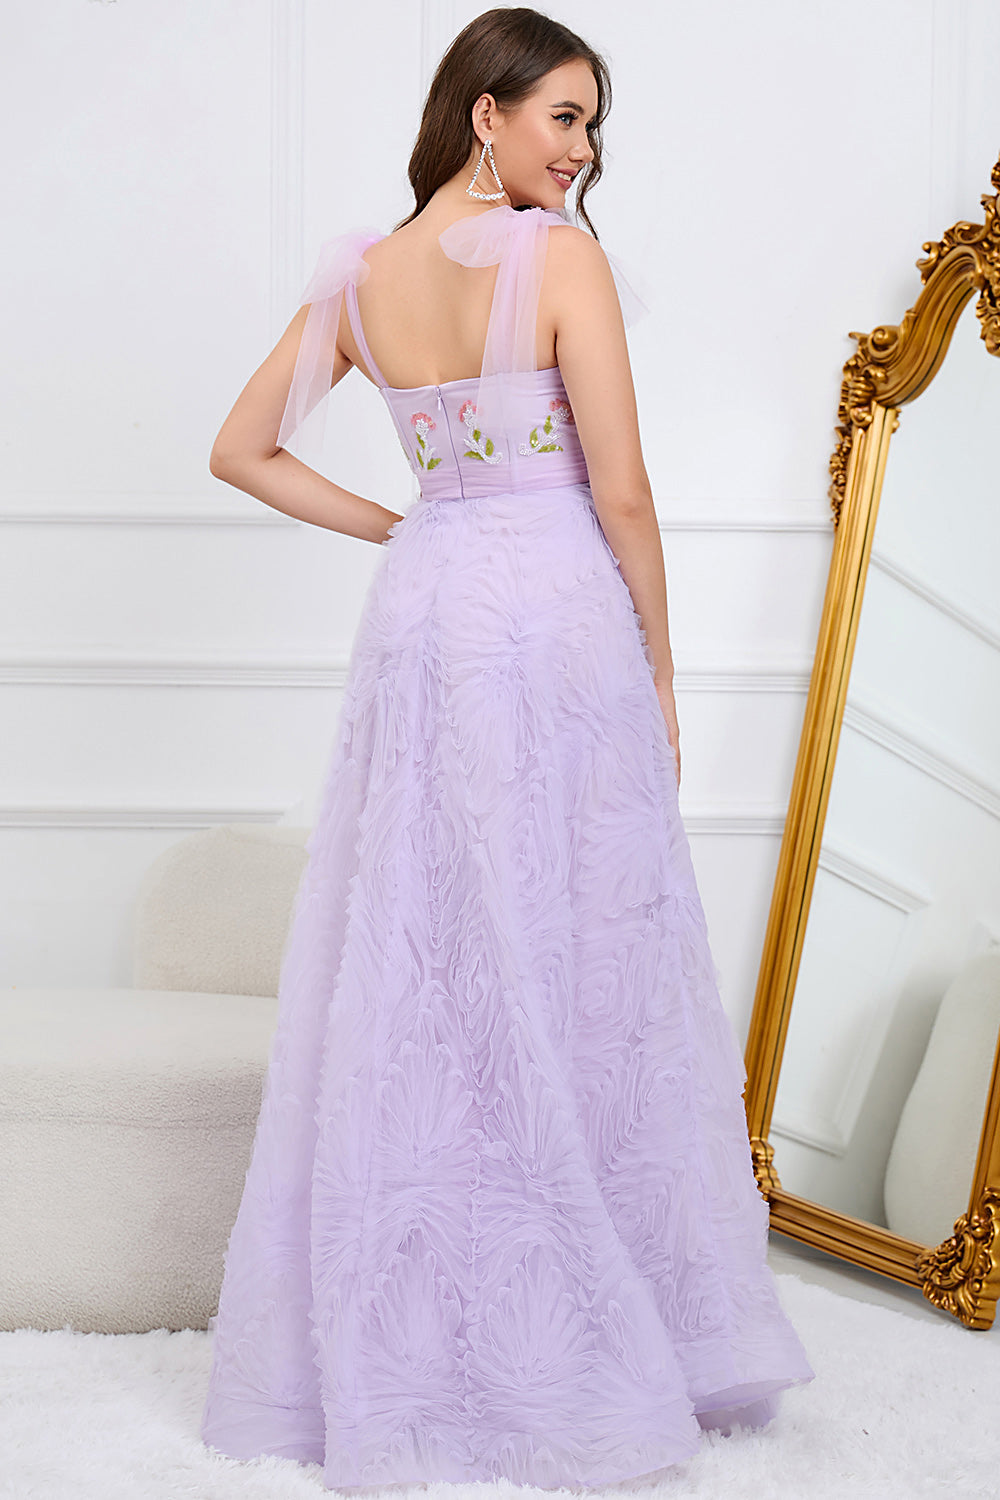 Zapaka Purple Prom Dress A-Line Spaghetti Straps Tulle Party Dress with Appliques, Purple / US14